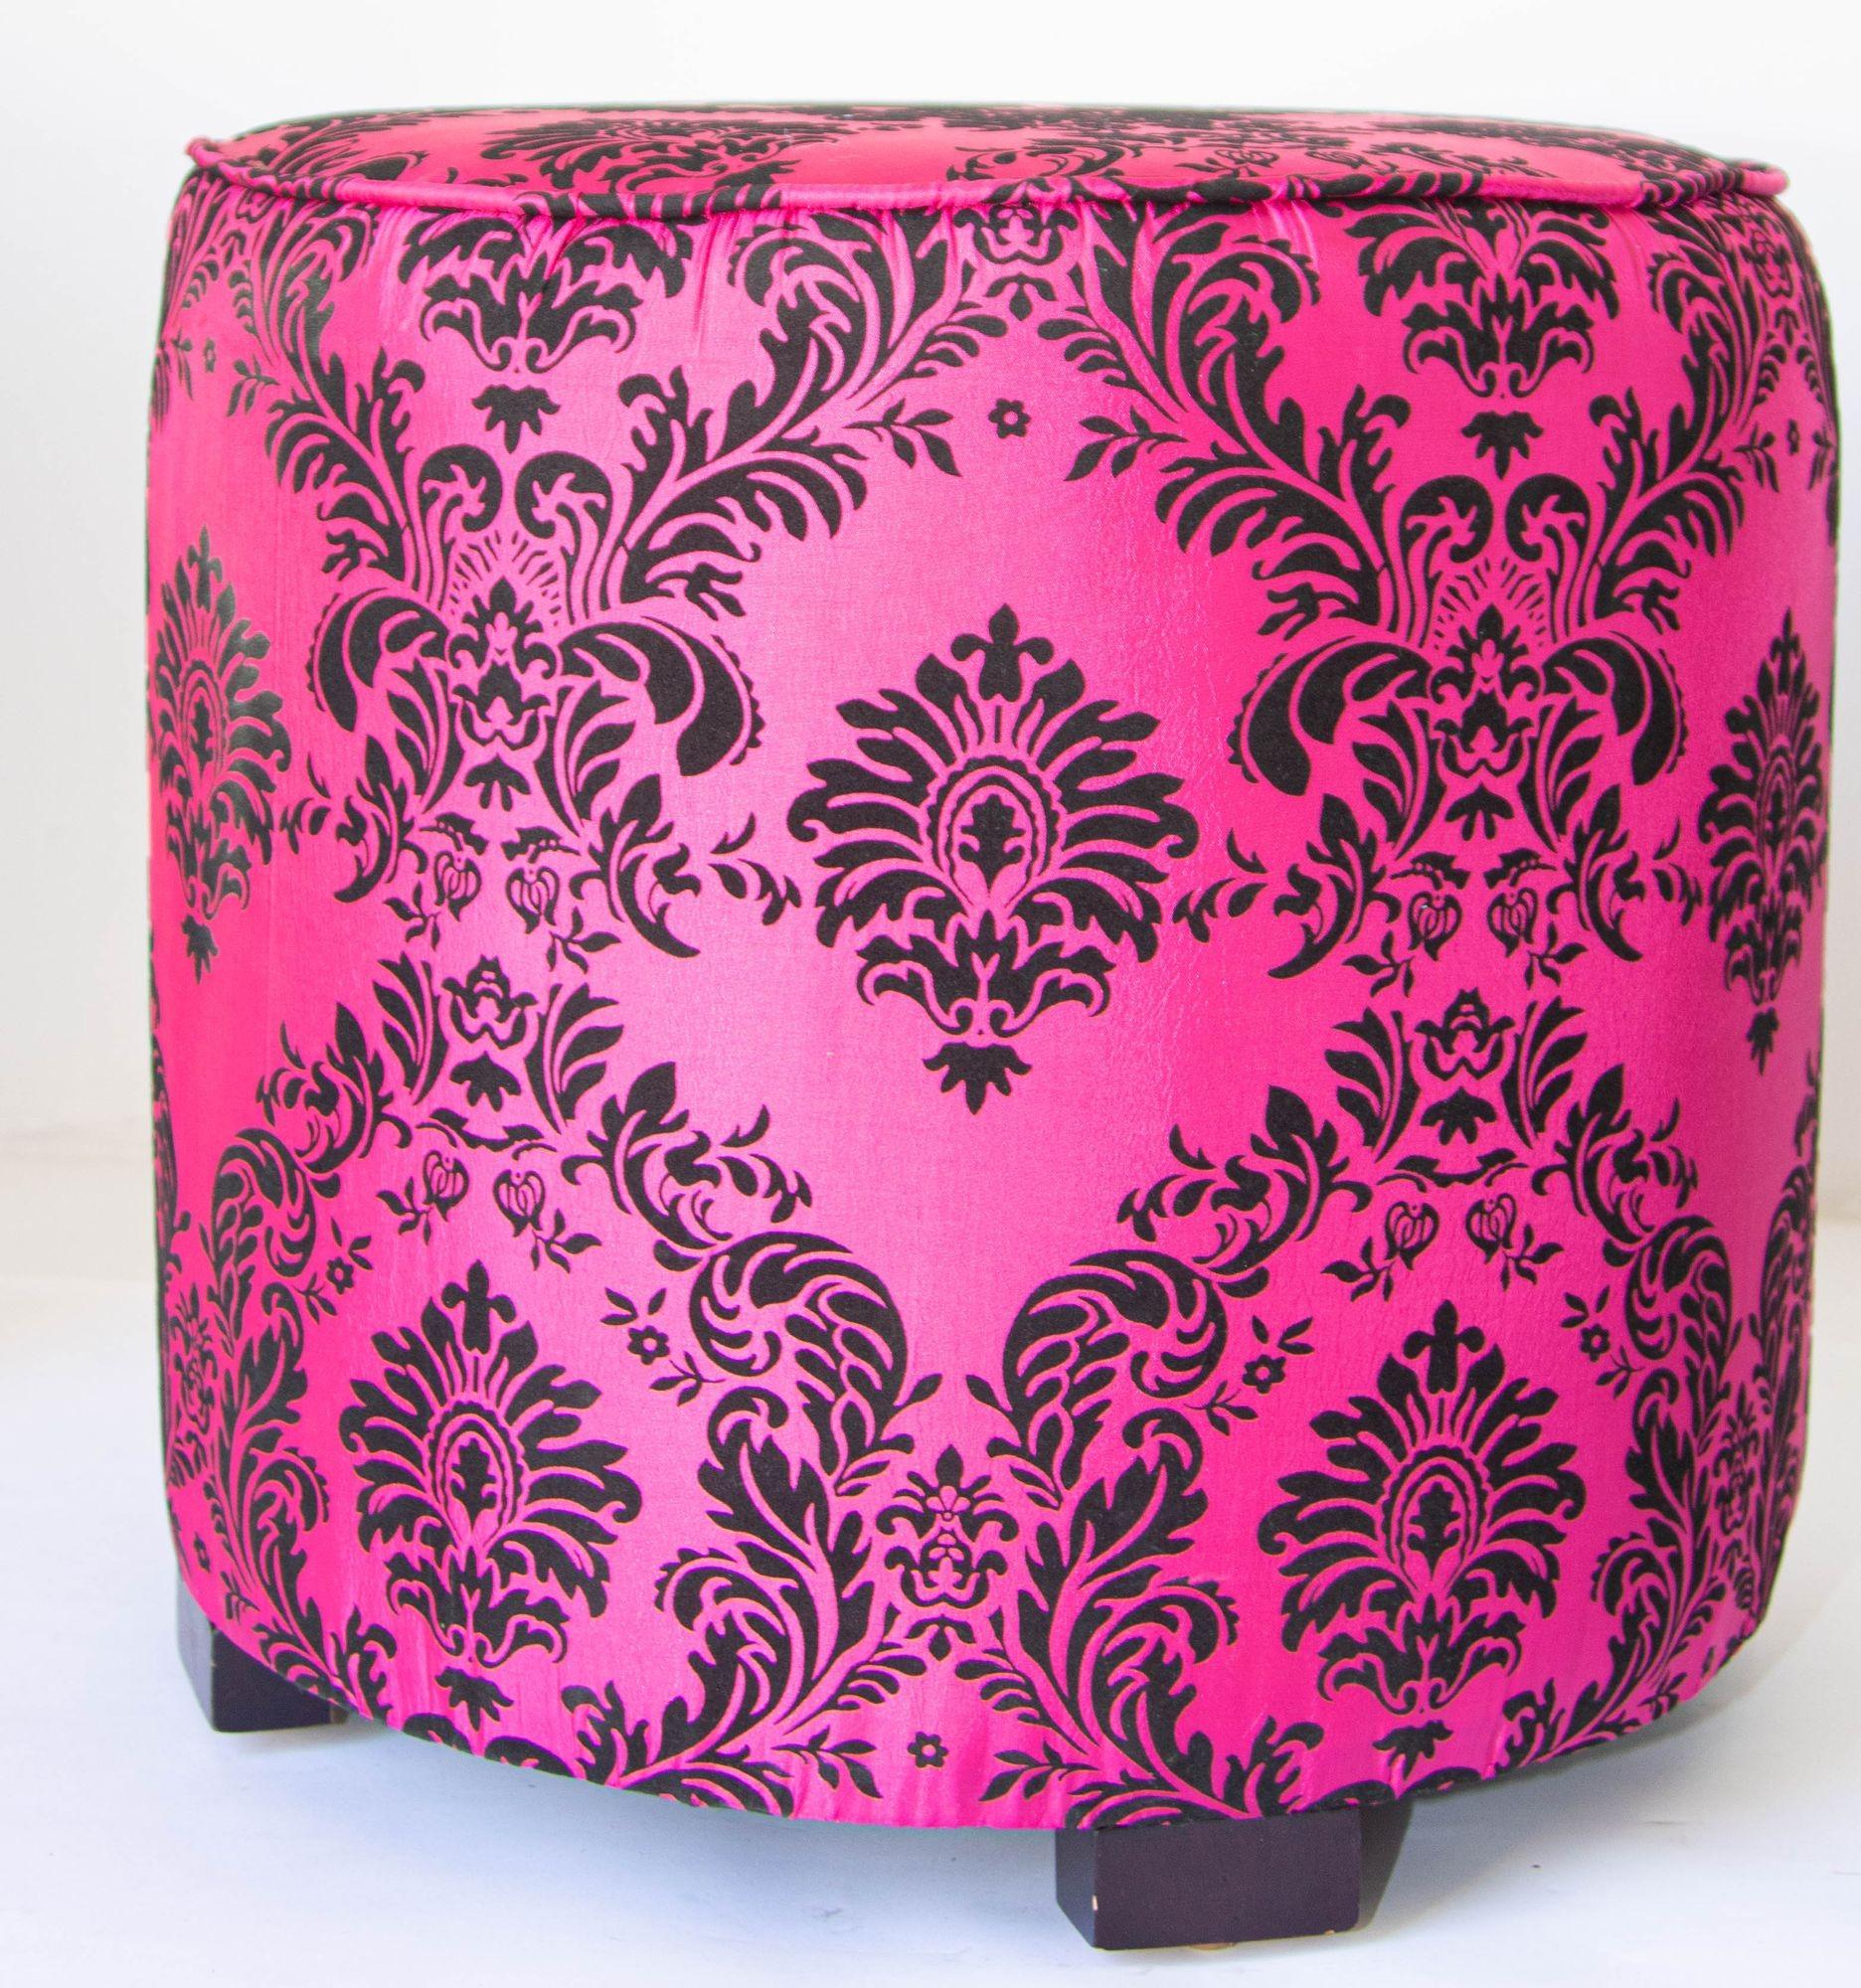 Art Deco Style fuchsia and black Moroccan stool, round ottoman or vanity stool in hot fuchsia color with black velvet cut design. 
The upholstery is a damask fabric in floral taffeta with a raised velvet printed texture. 
Pair of modern contemporary